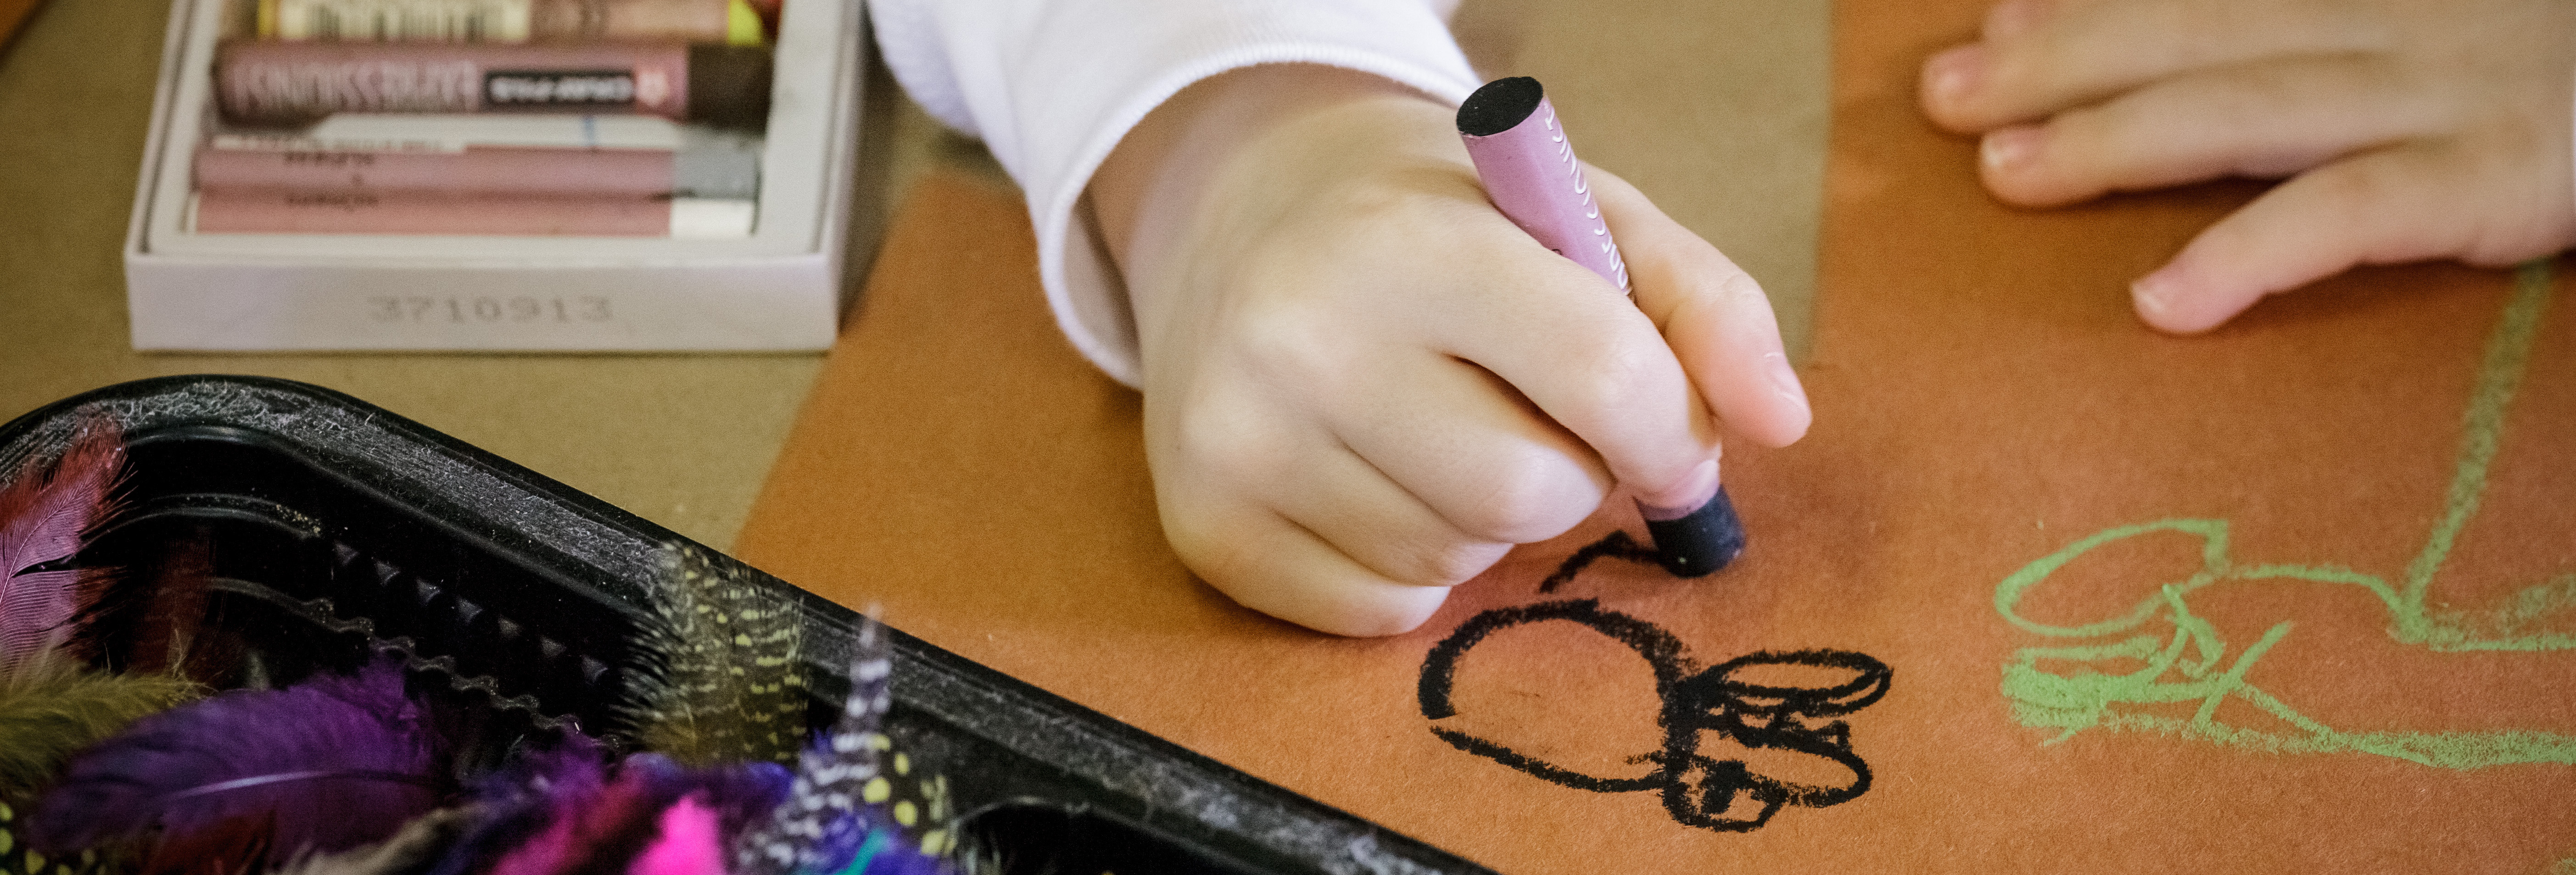 Close up image of a child's hand as they use an oil pastel to color on brown paper. There is a container of oil pastels to the left and a container of feathers in the foreground.